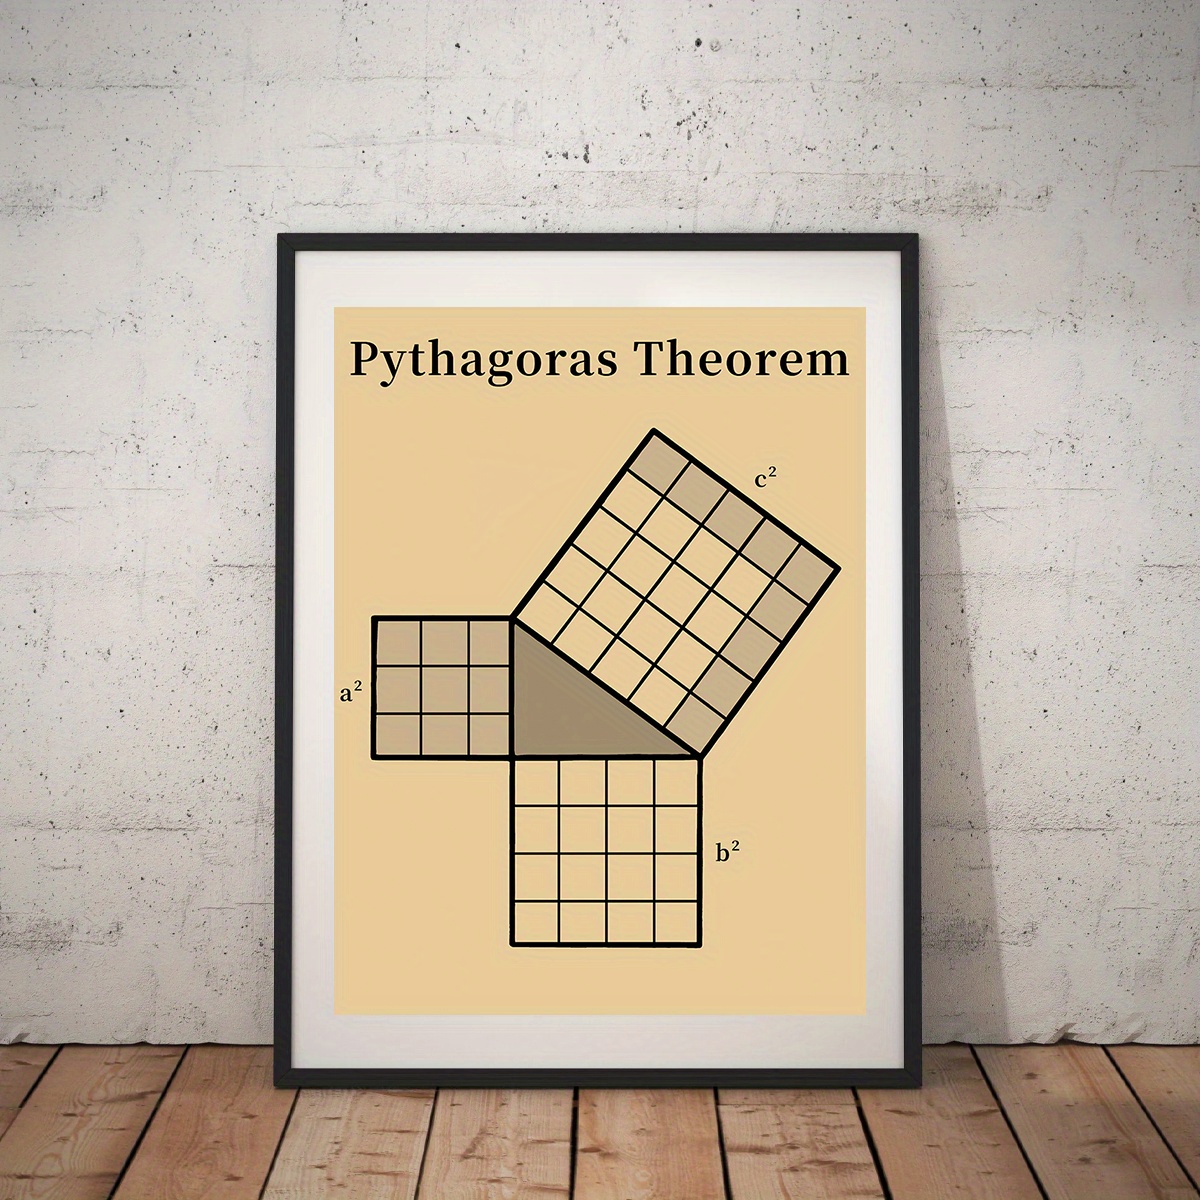 

30*40cm Thickened Canvas Painting, Upgrade Roll Packaging, Waterproof Anti-light Anti-oxidation, Math Art Poster, Pythagorean Theorem, Teacher Office Classroom Wall Poster